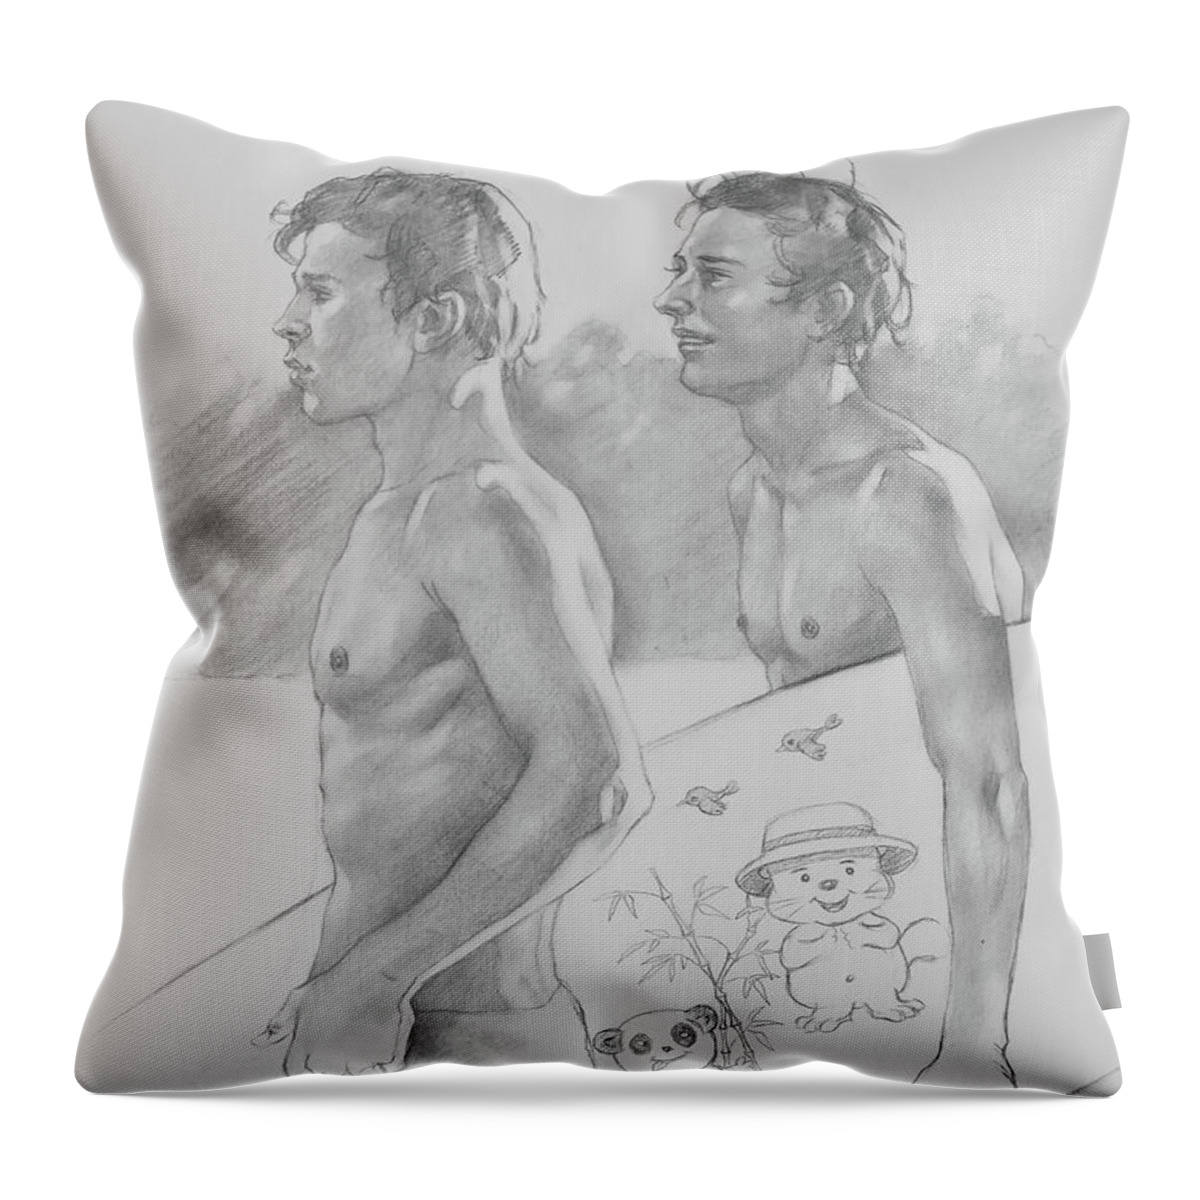 Drawing Throw Pillow featuring the drawing Drawing- Men in seaside#19910 by Hongtao Huang